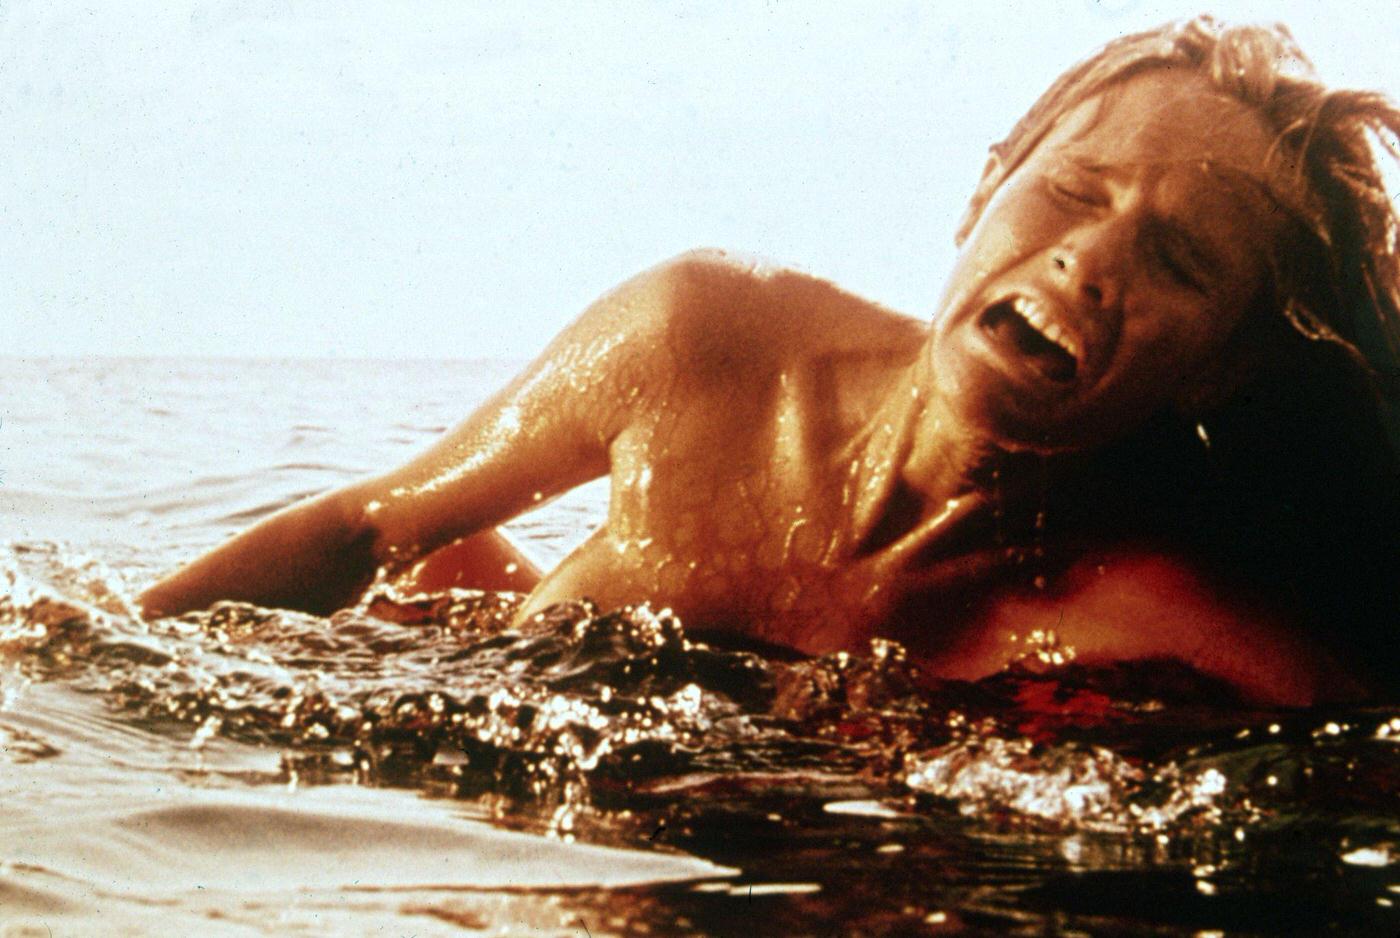 A female swimmer screams as she is attacked by a giant Great White shark (not pictured) in a still from the film 'Jaws,' 1975